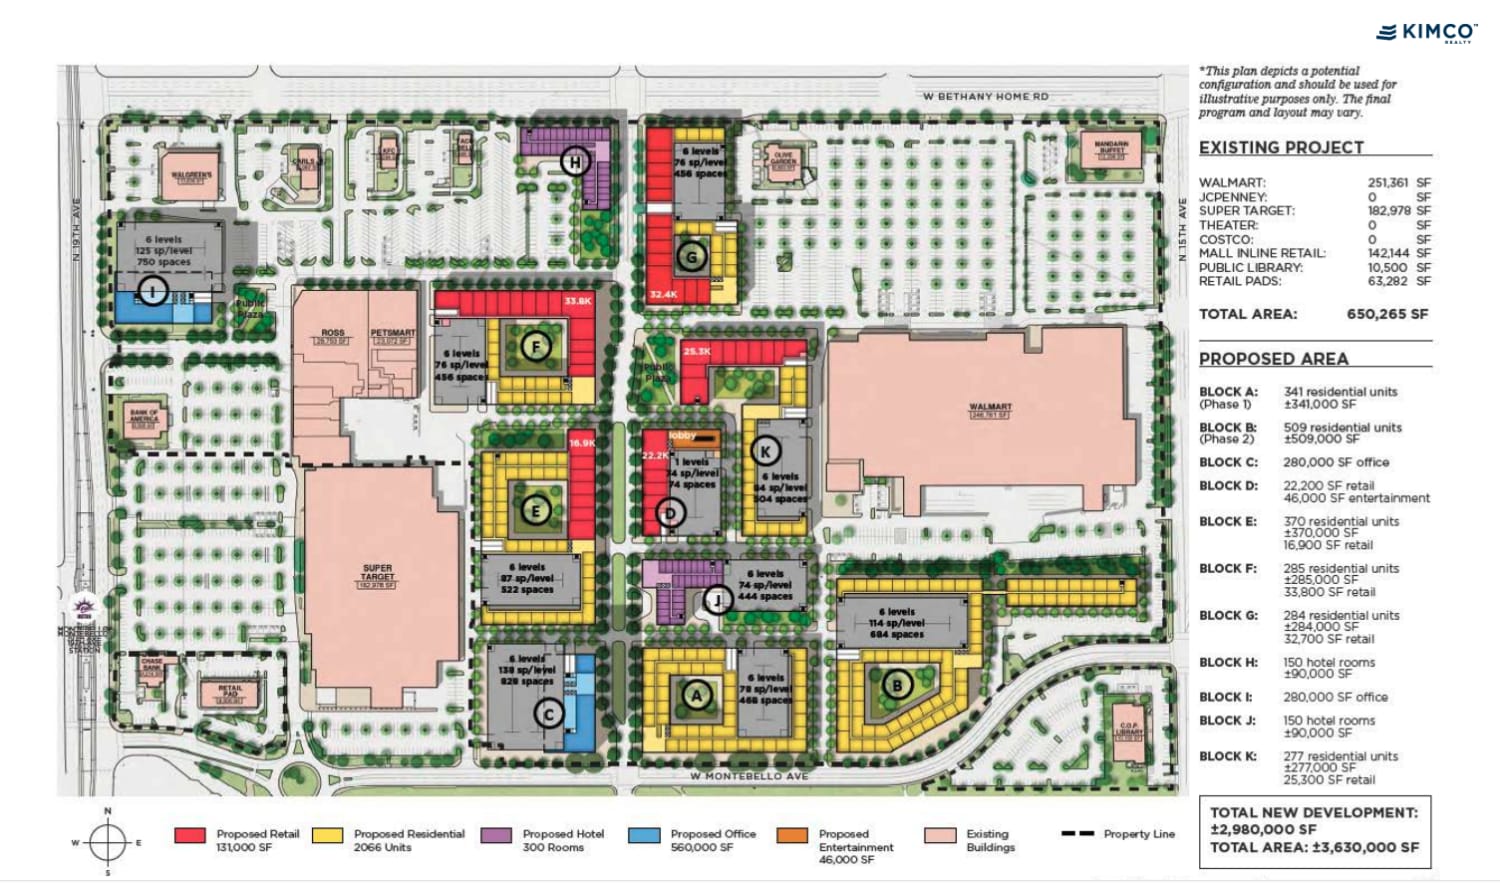 Case Study: Flexible zoning allows redevelopment of a twice-dead 50-year-old mall in Central Phoenix with a new pedestrian street near new light rail. Plans detail an urban village with 2,000 apartments, 500ksqft office, 300 hotel rooms, and two big boxes demolished around existing tenants.